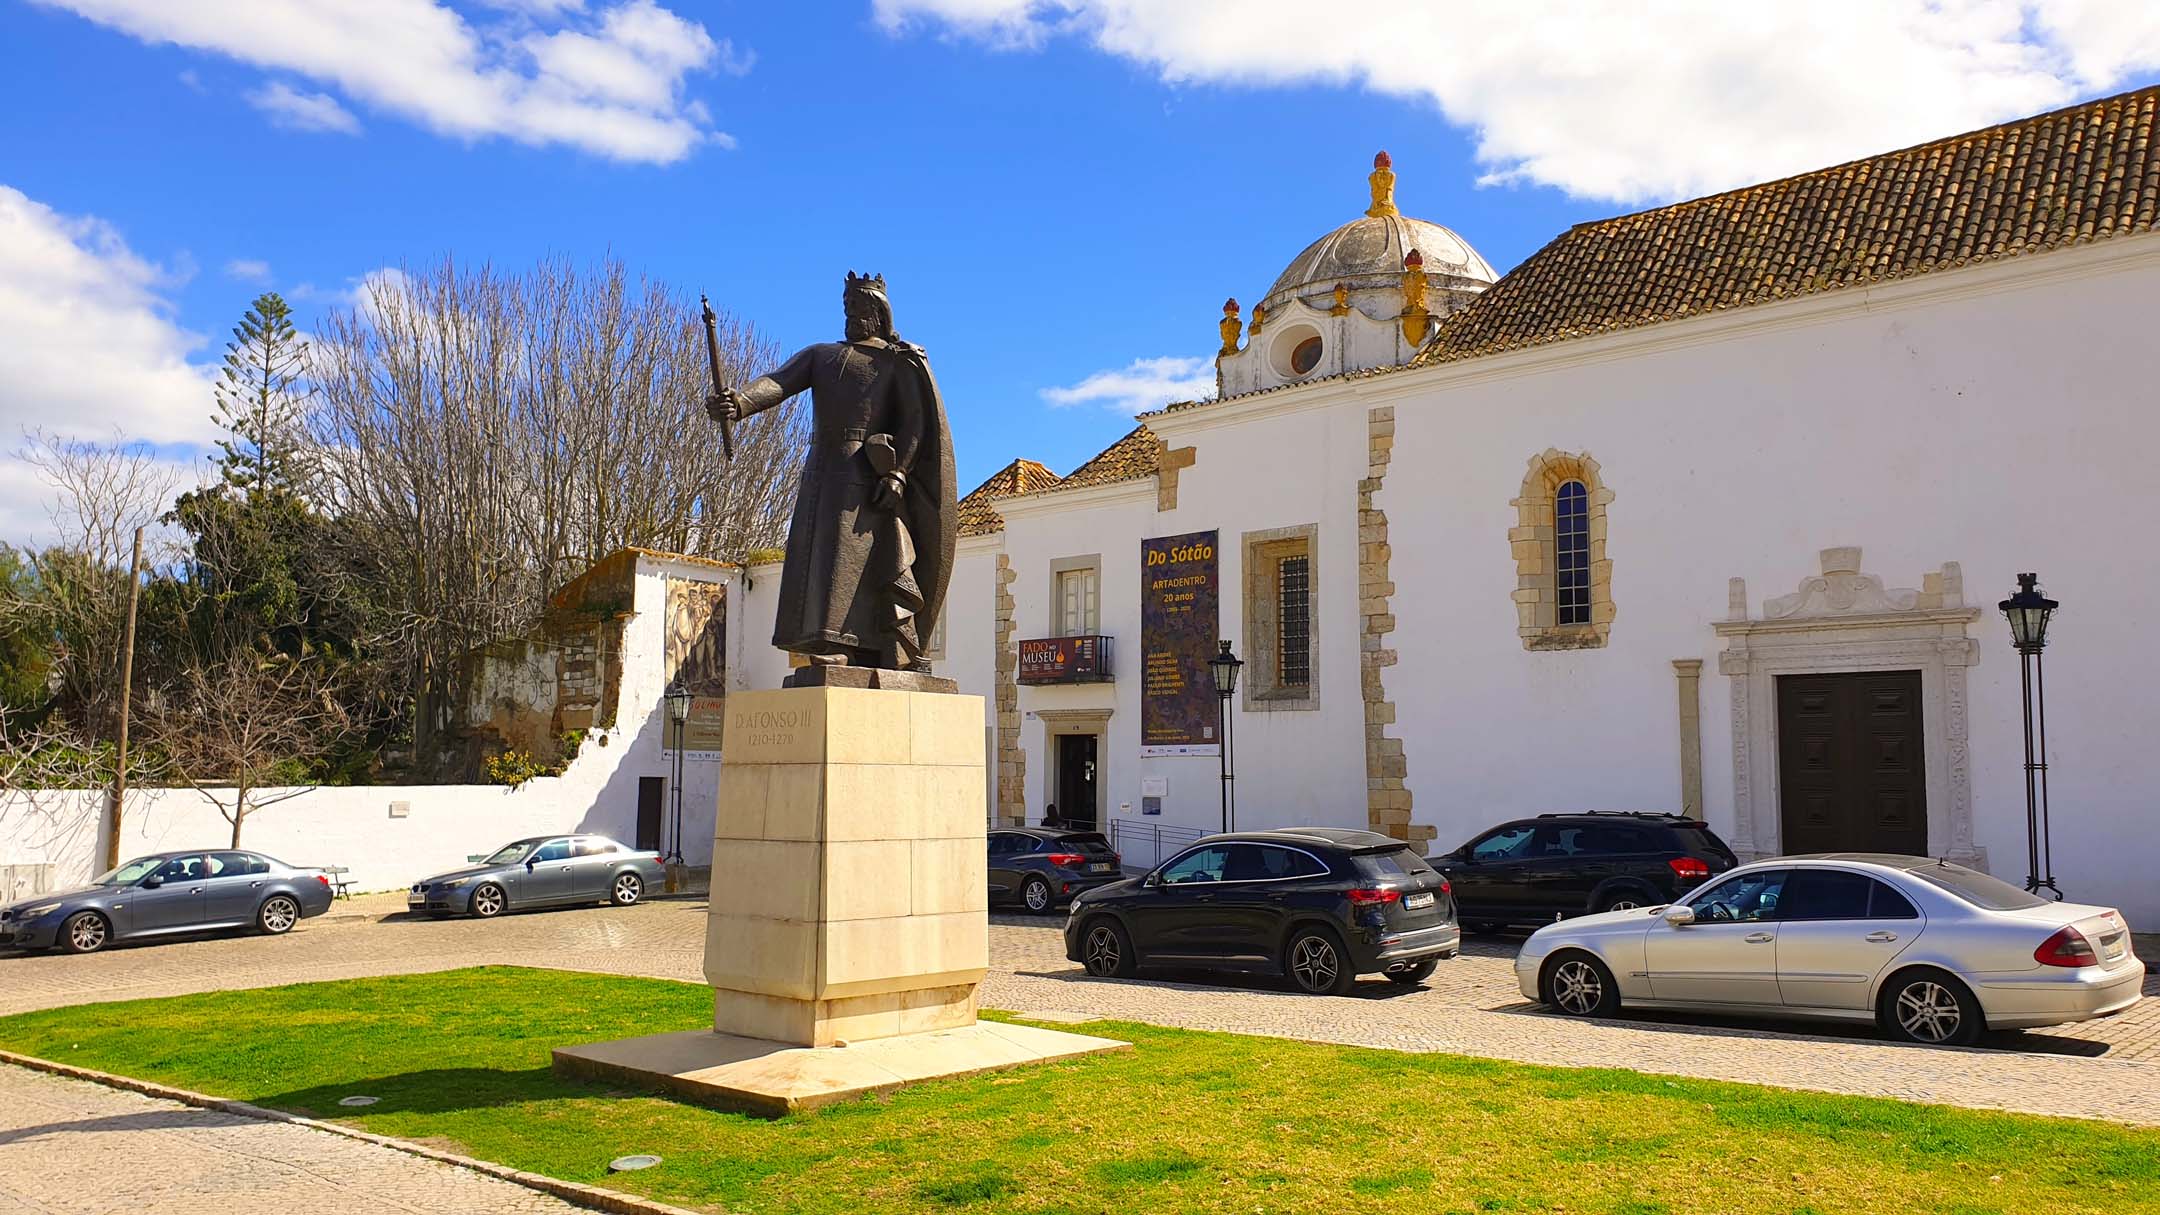 Monumento a Don Alfonso III